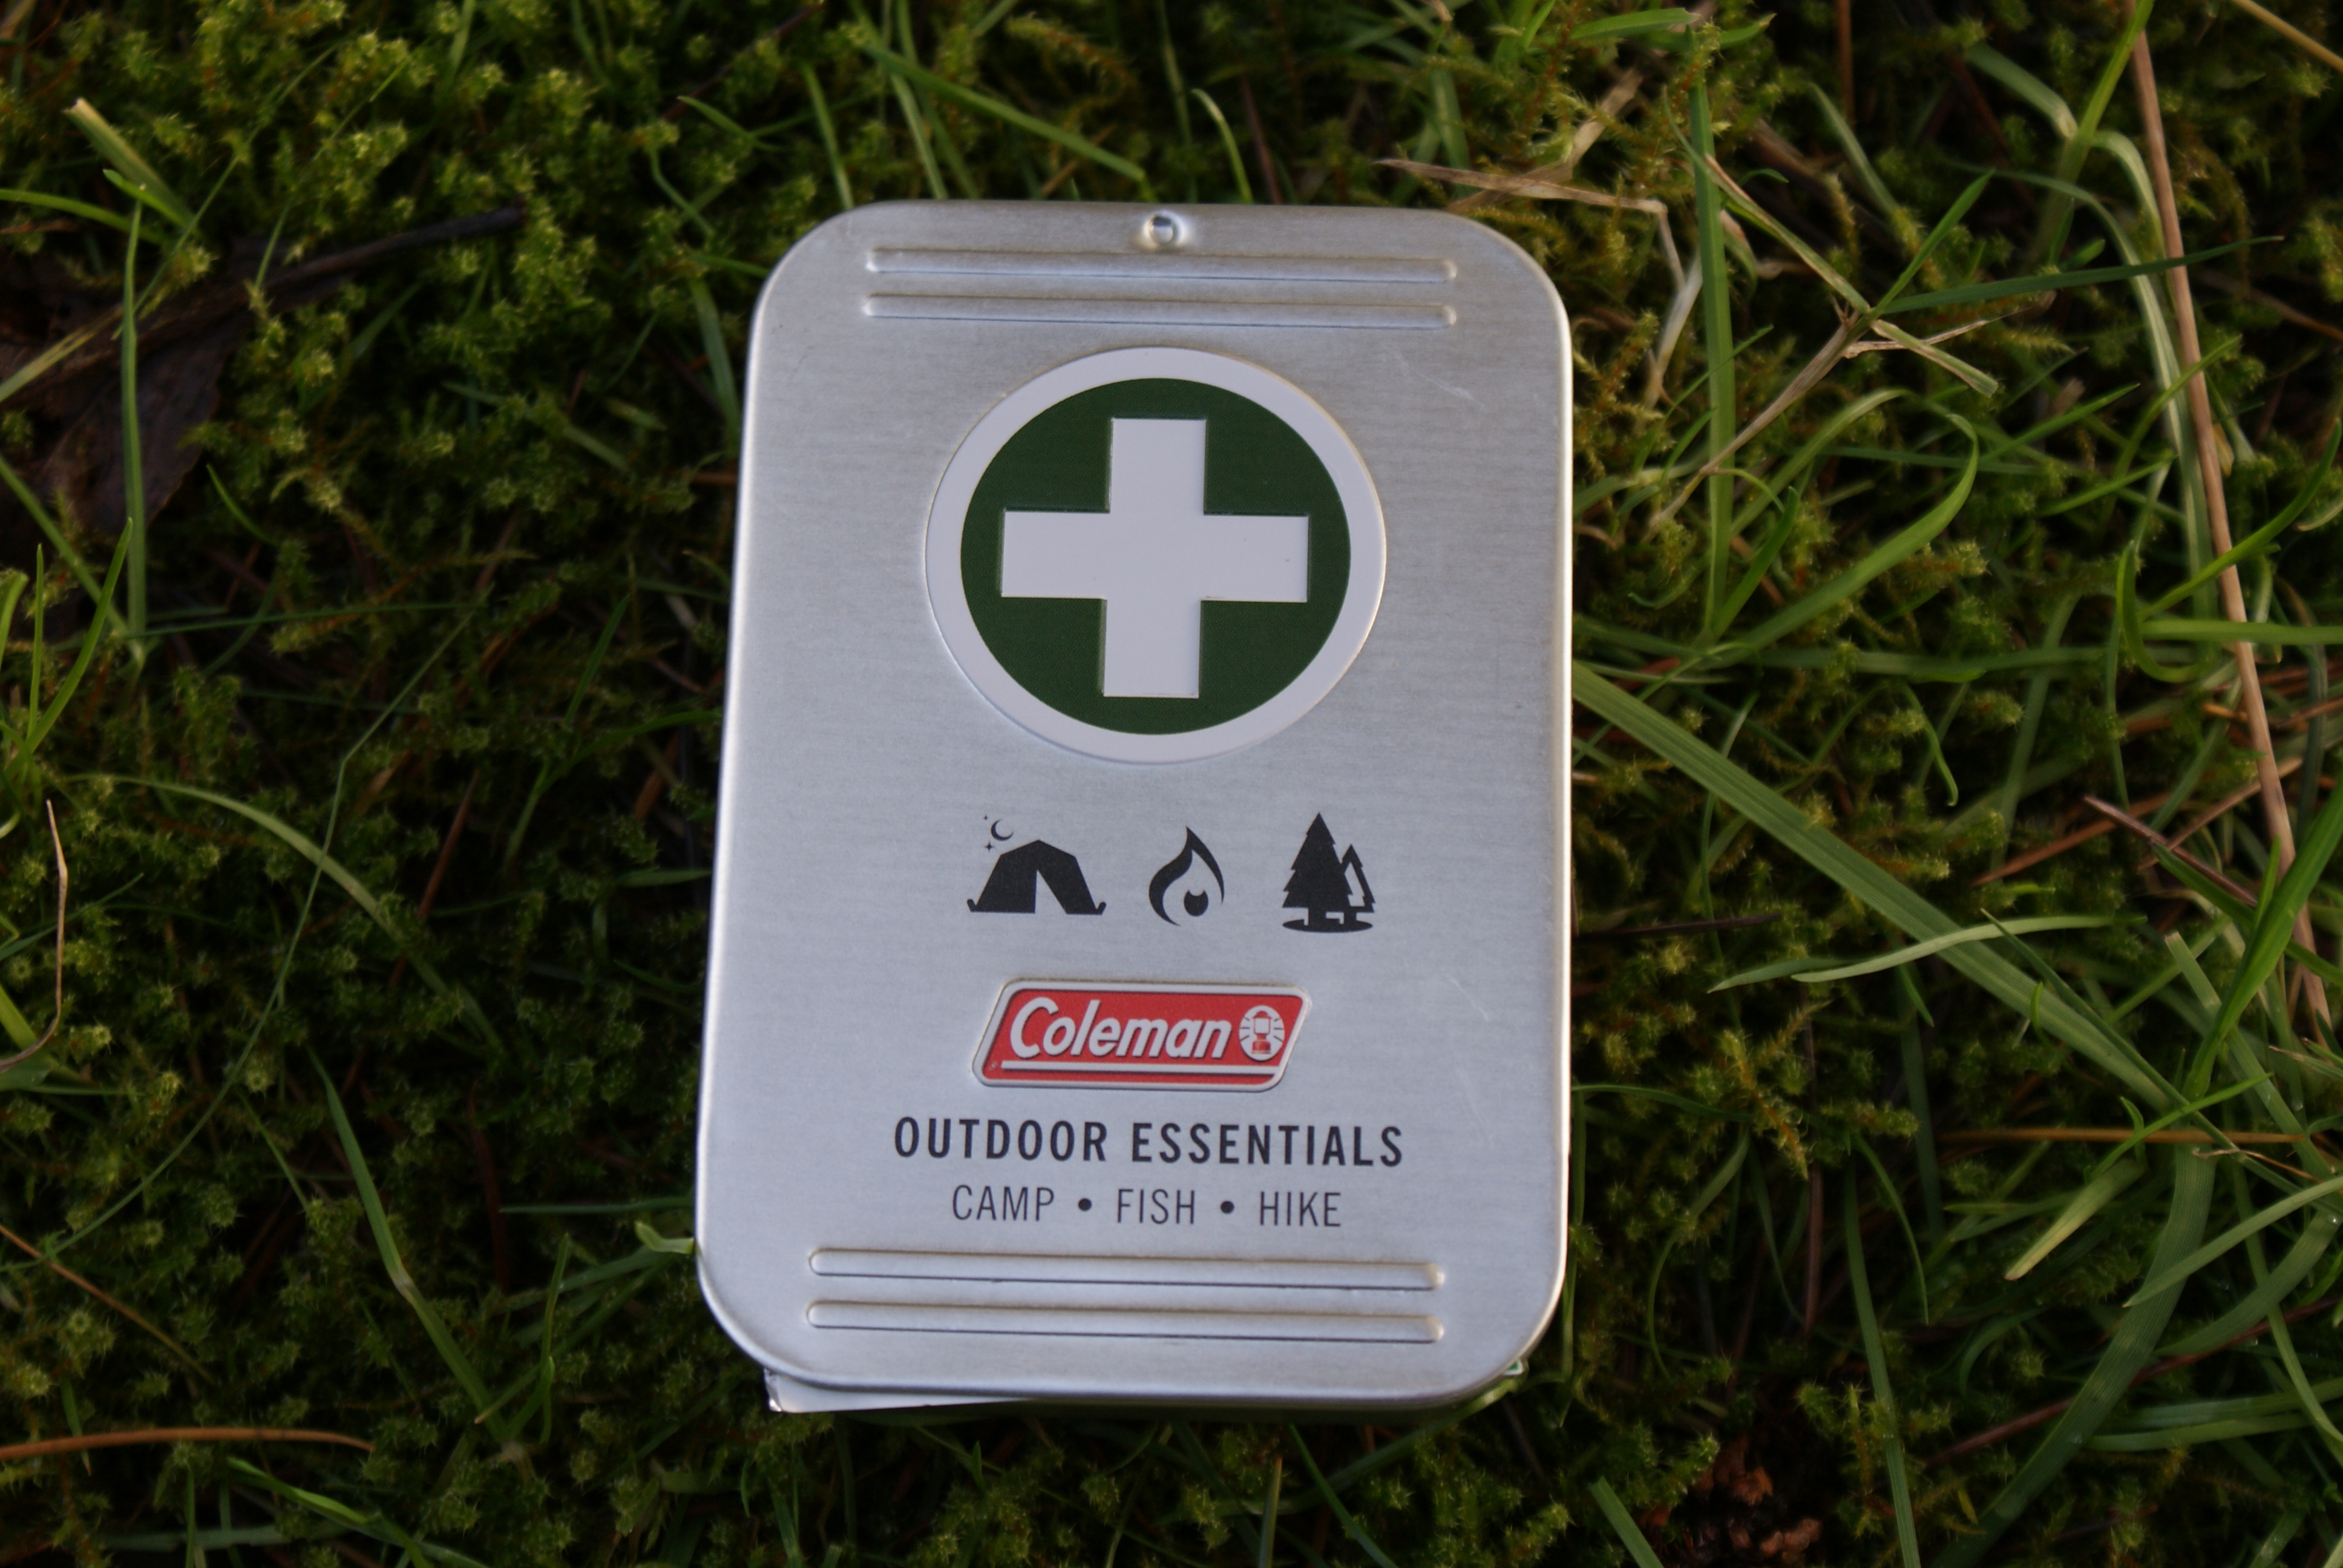 Gear Review and Giveaway: Coleman Outdoor Essentials First Aid Kit